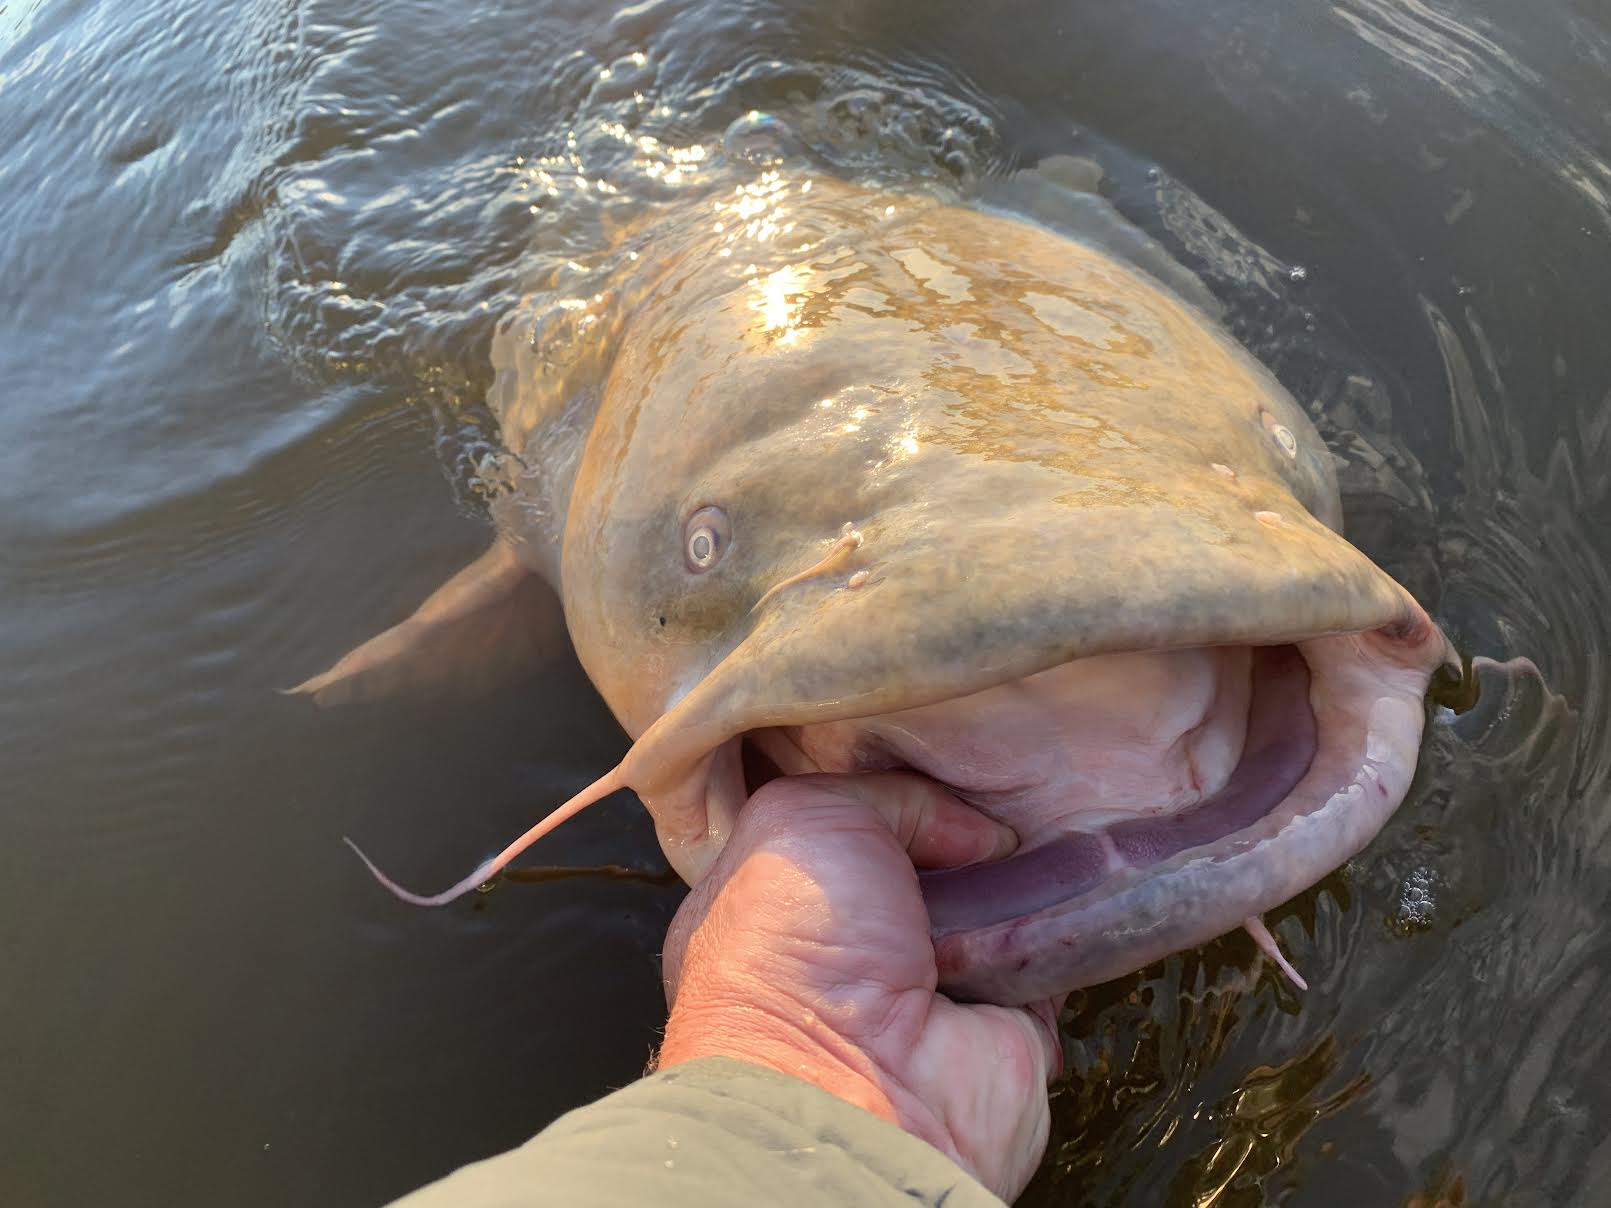 The possible new state-record flathead catfish from Michigan was released.